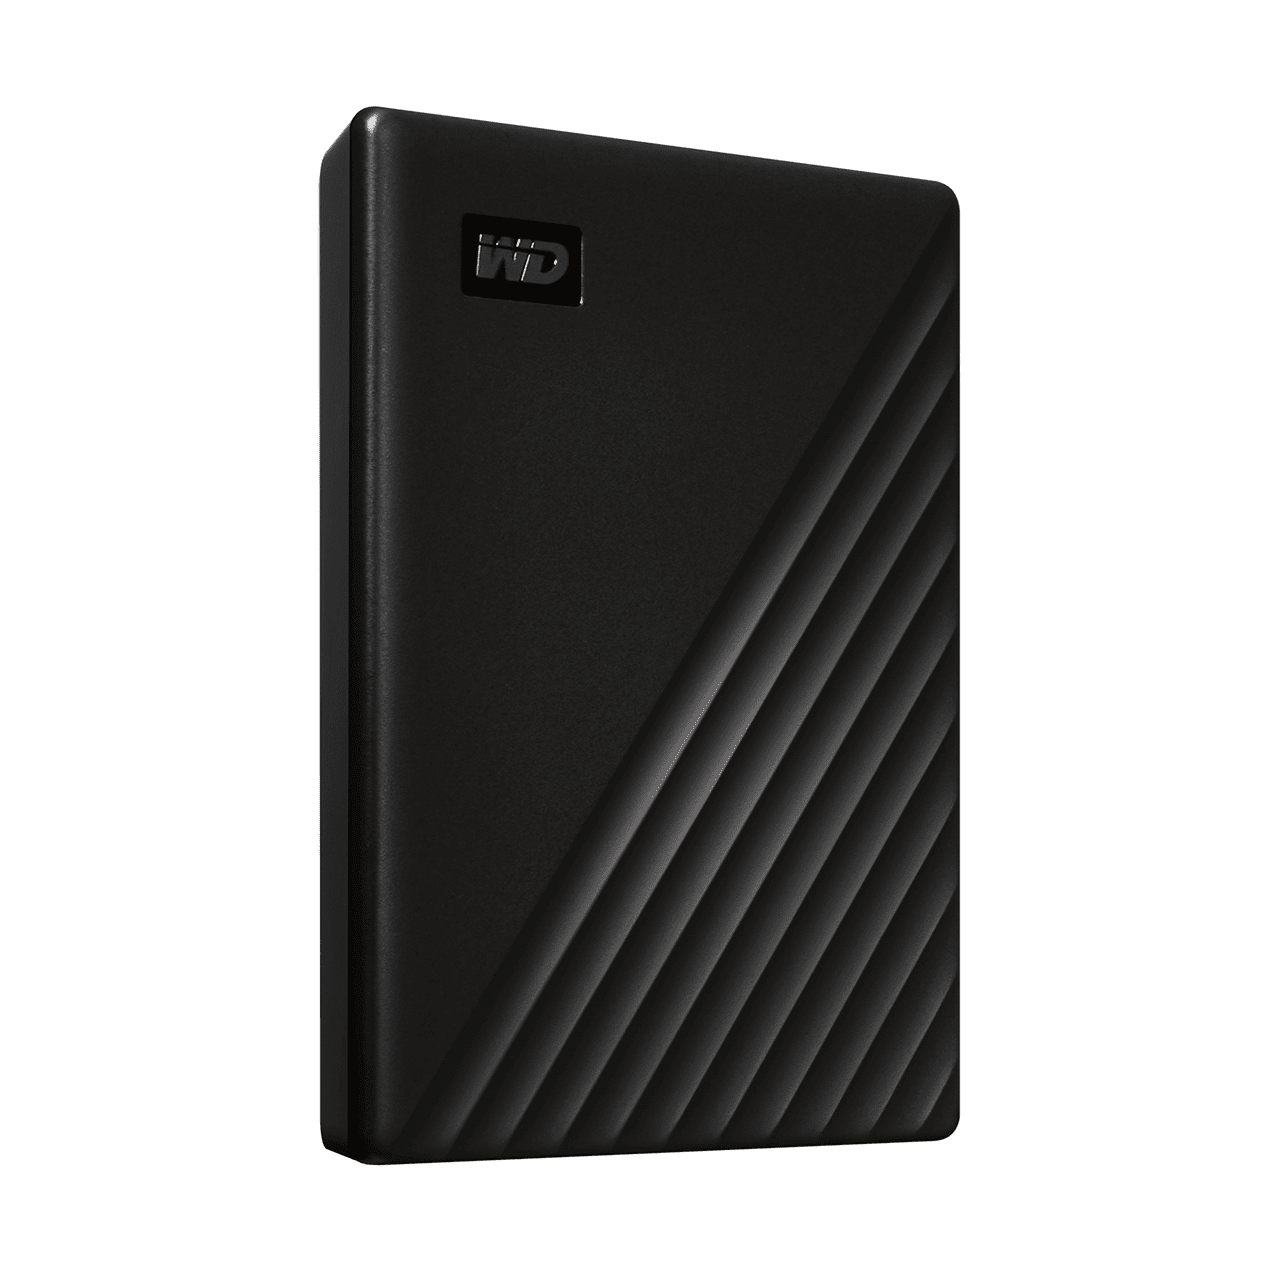 WD Western Digital My Passport  5TB  ( BLACK ) Slim Portable External Hard Disk USB 3.0 With WD Backup Software & Password Protection